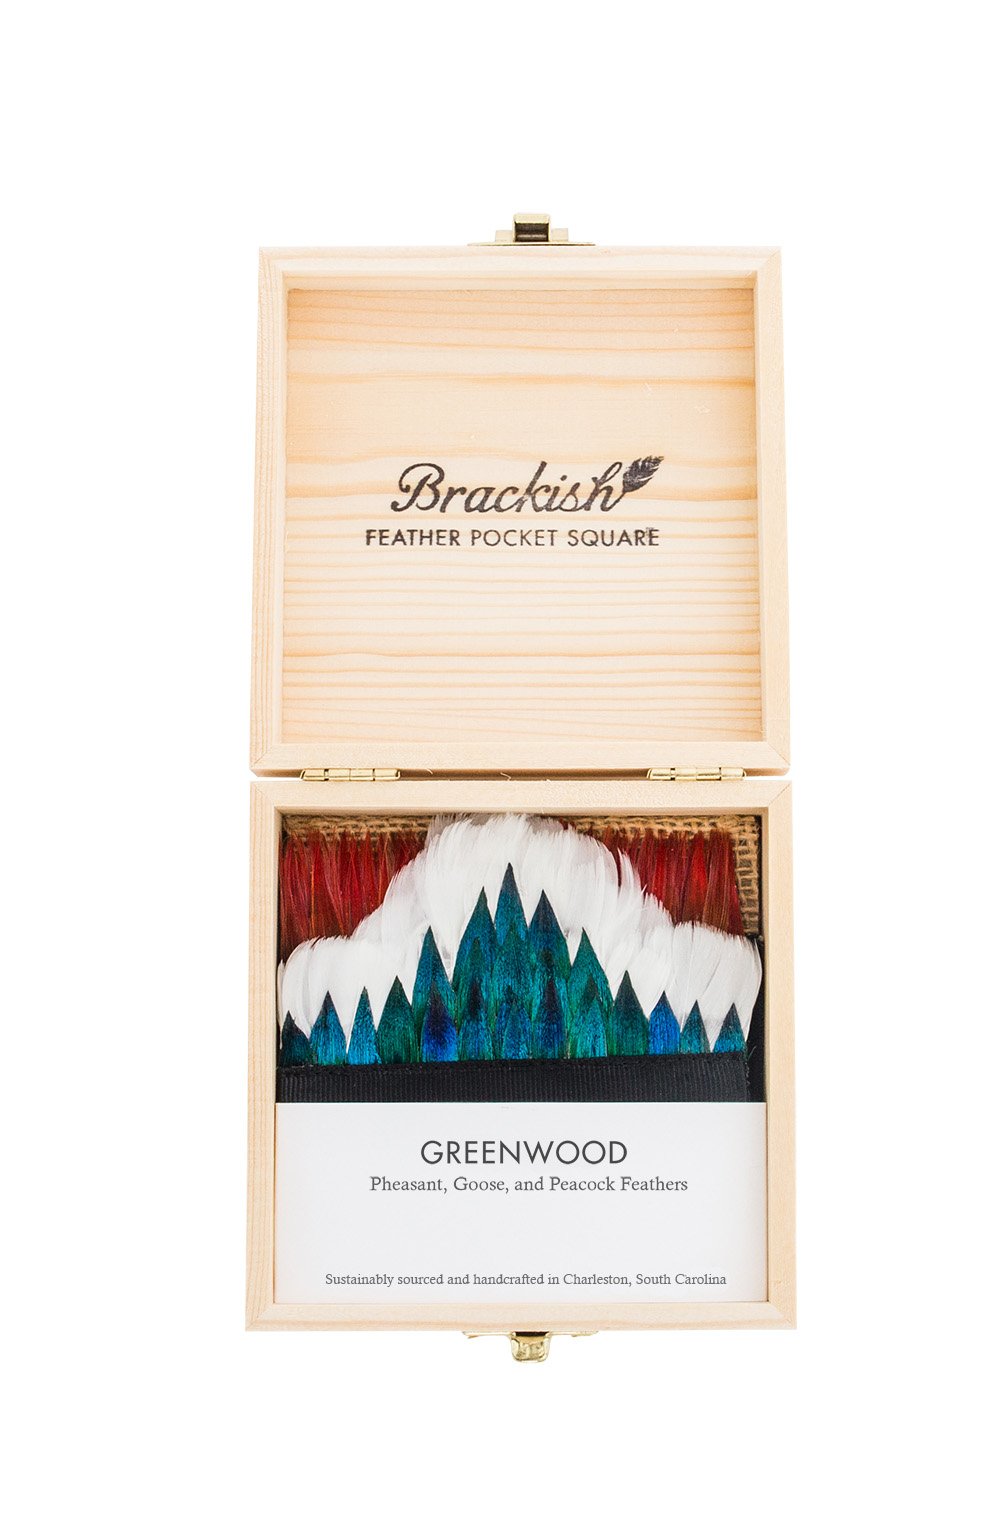 GREENWOOD FEATHER POCKET SQUARE